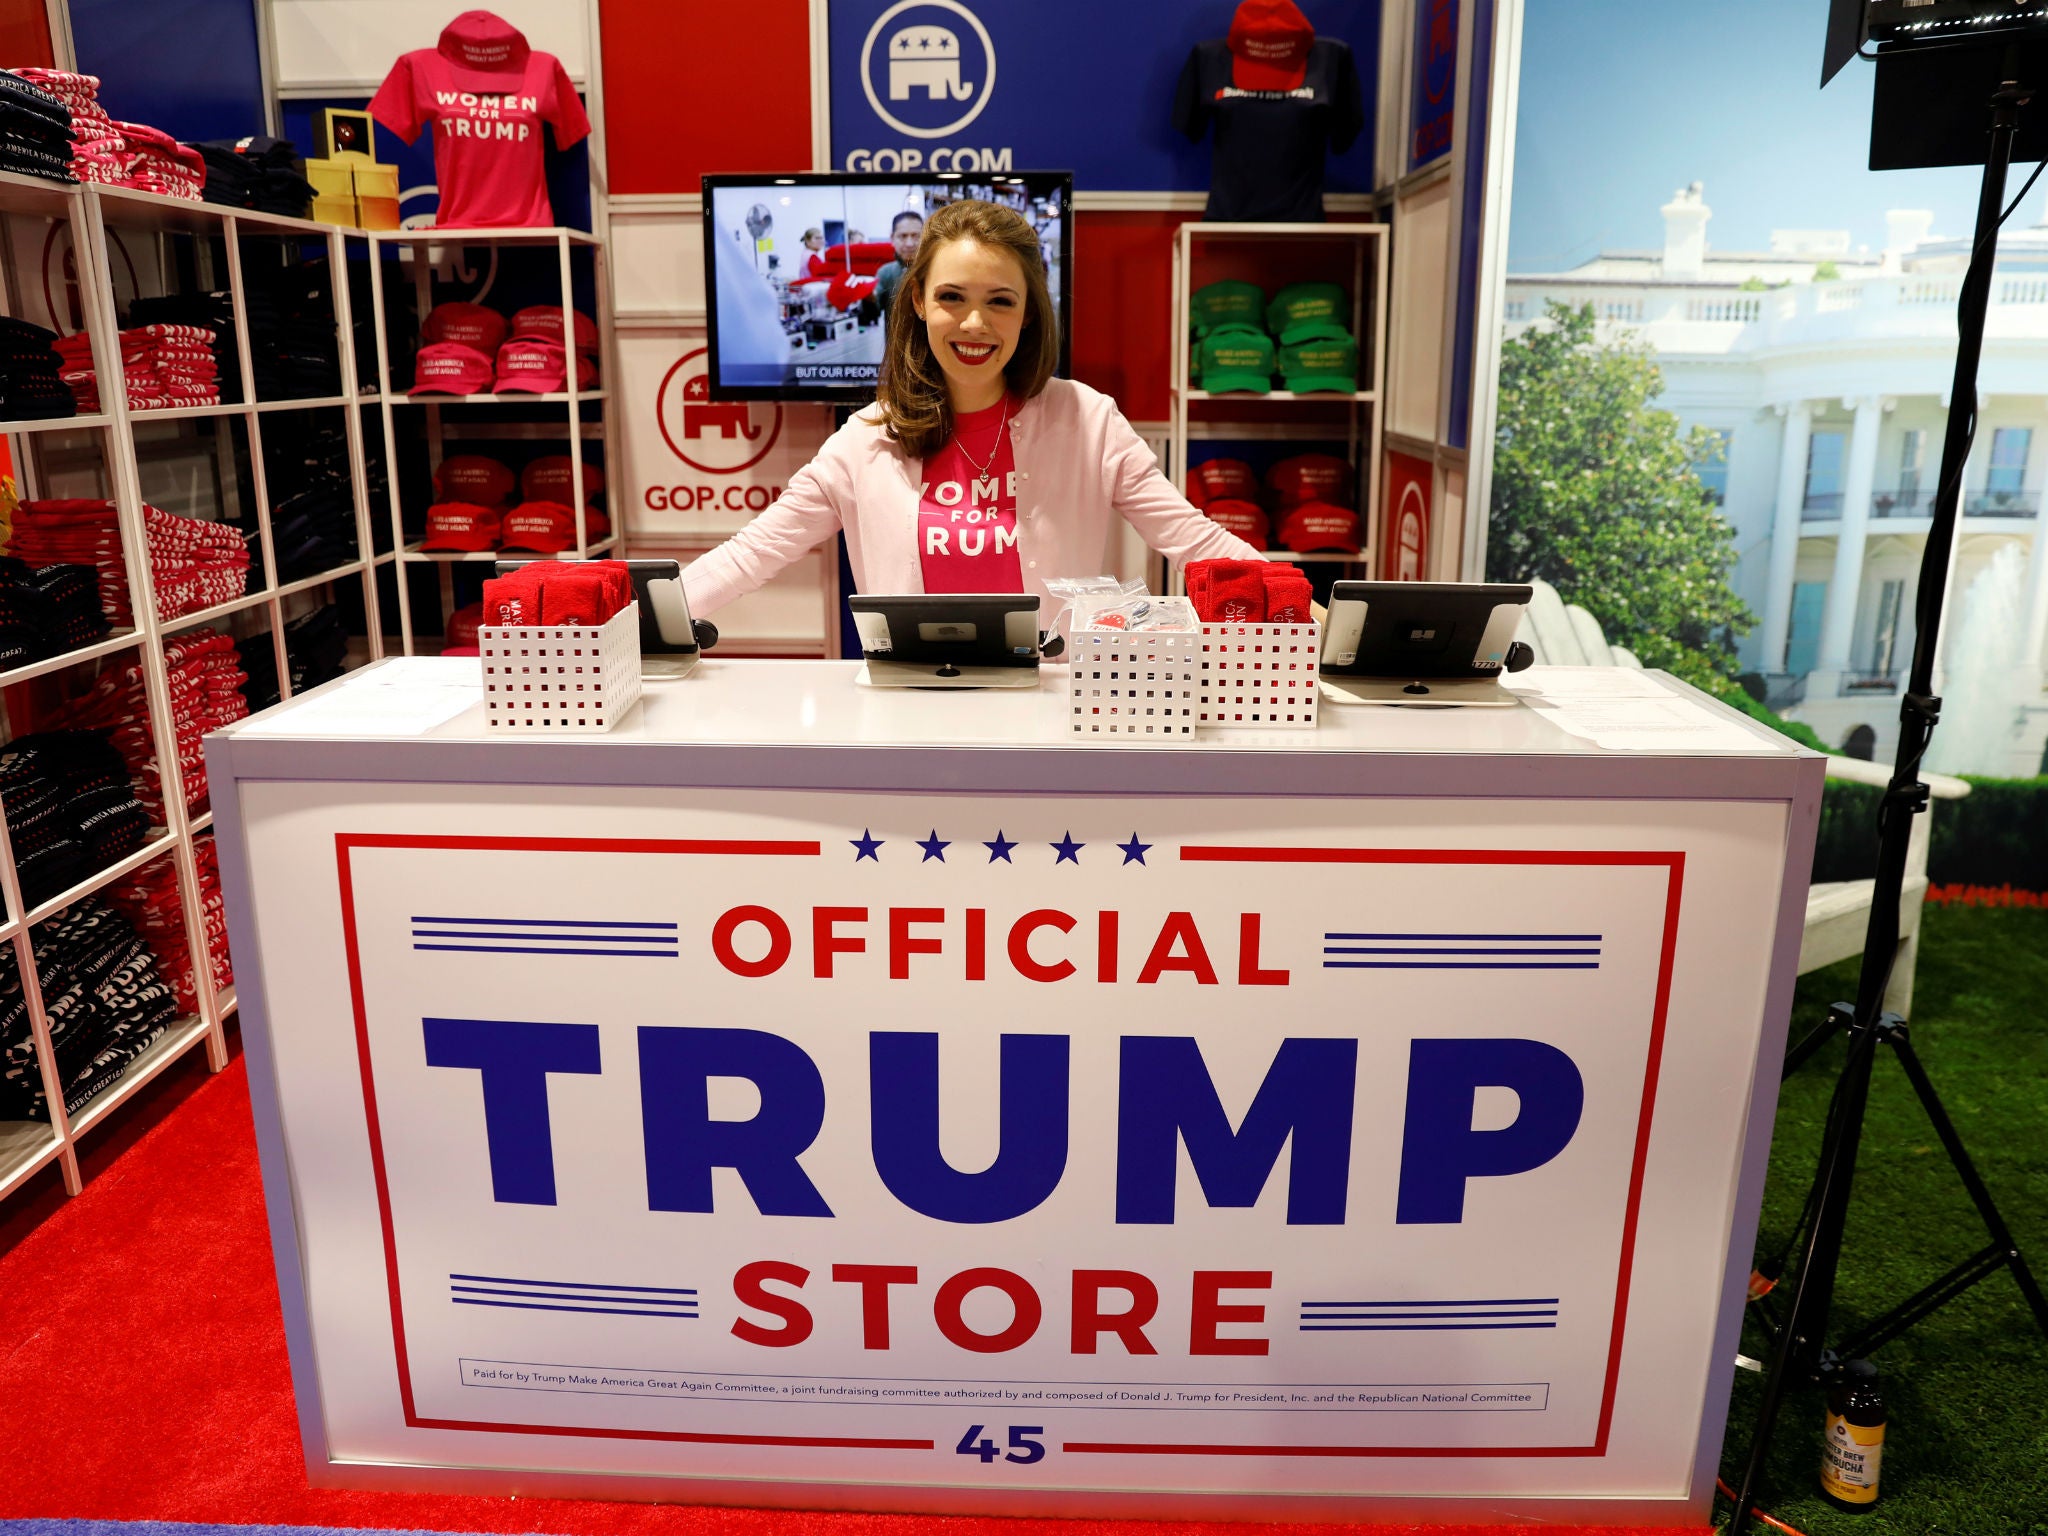 Merritt Corrigan tends the Official Trump Store at the Conservative Political Action Conference (CPAC) at National Harbor, Maryland